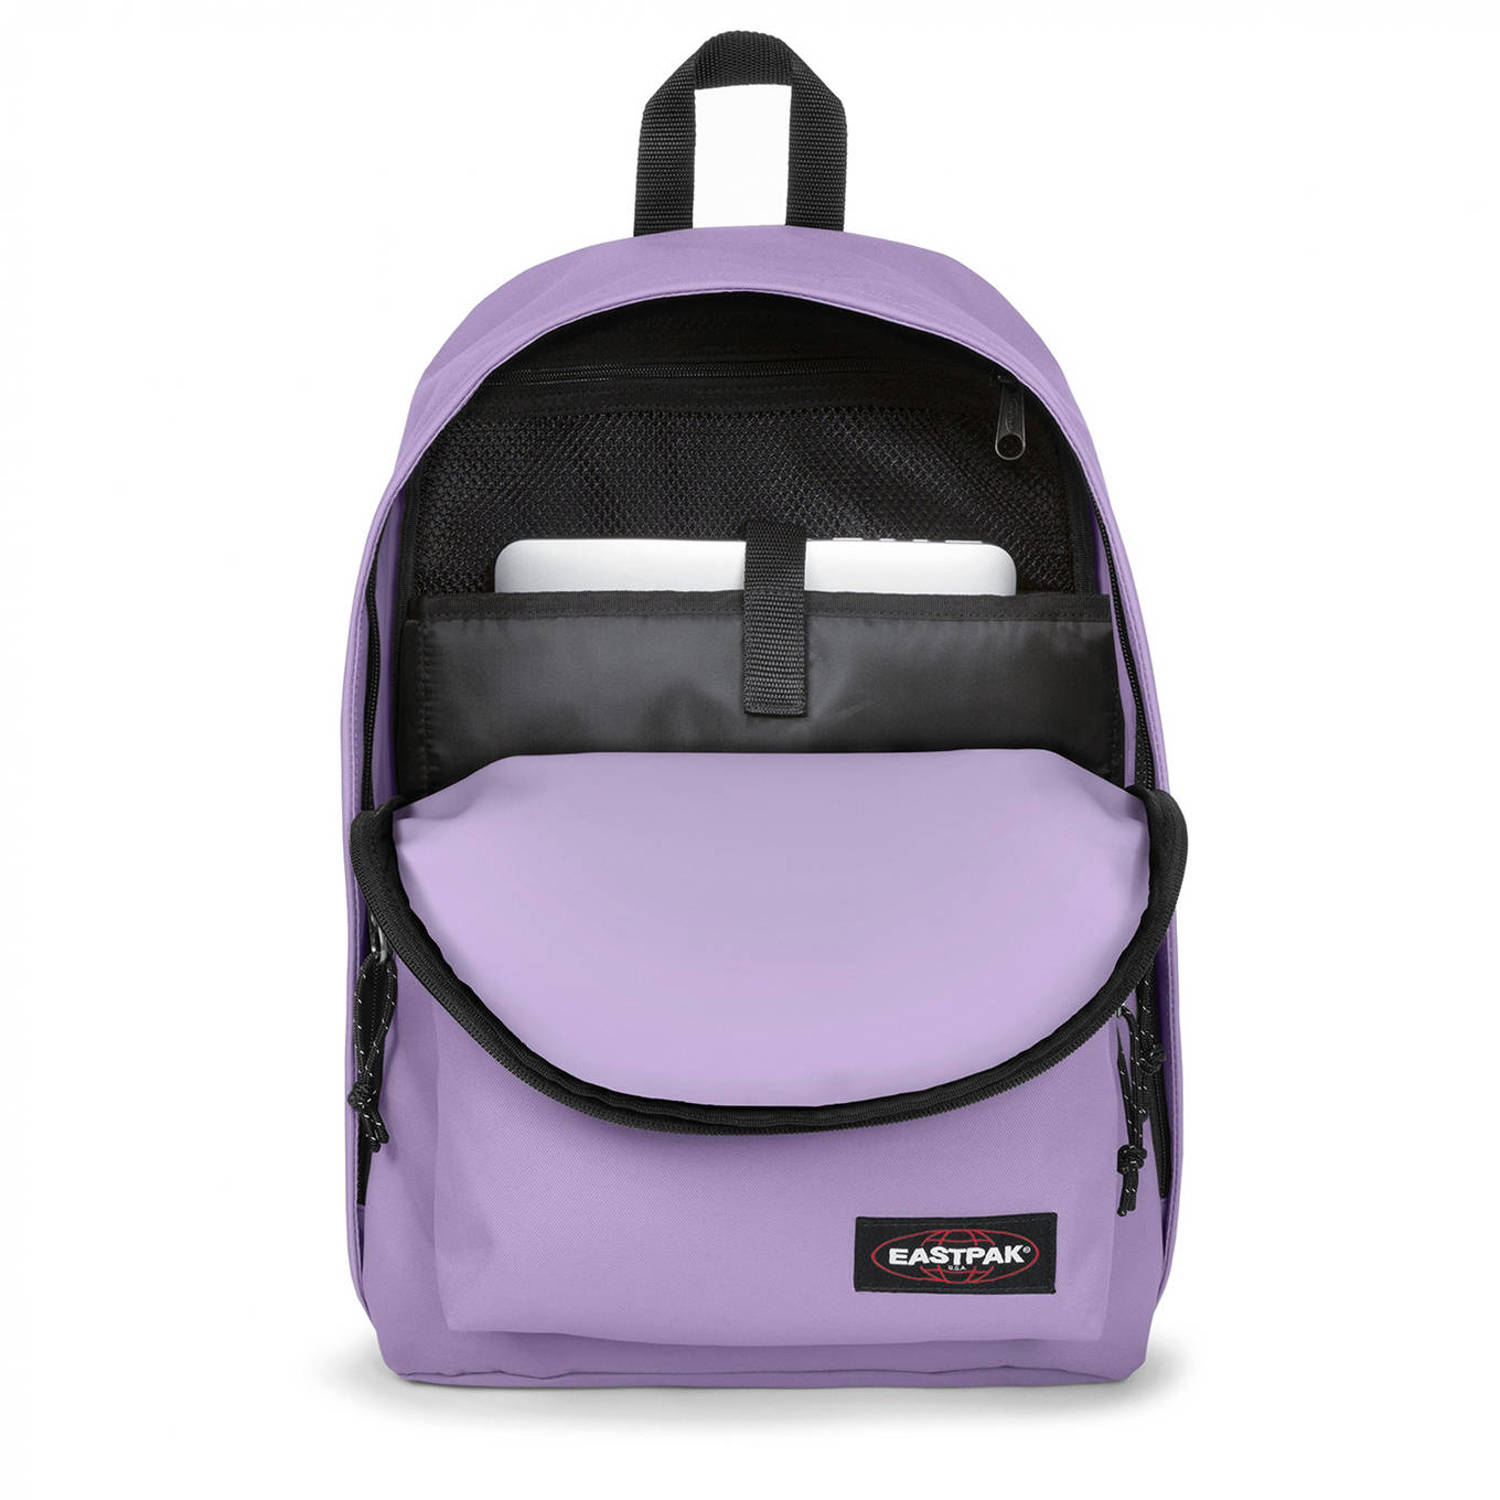 Eastpak rugzak Out of Office lavender lilac